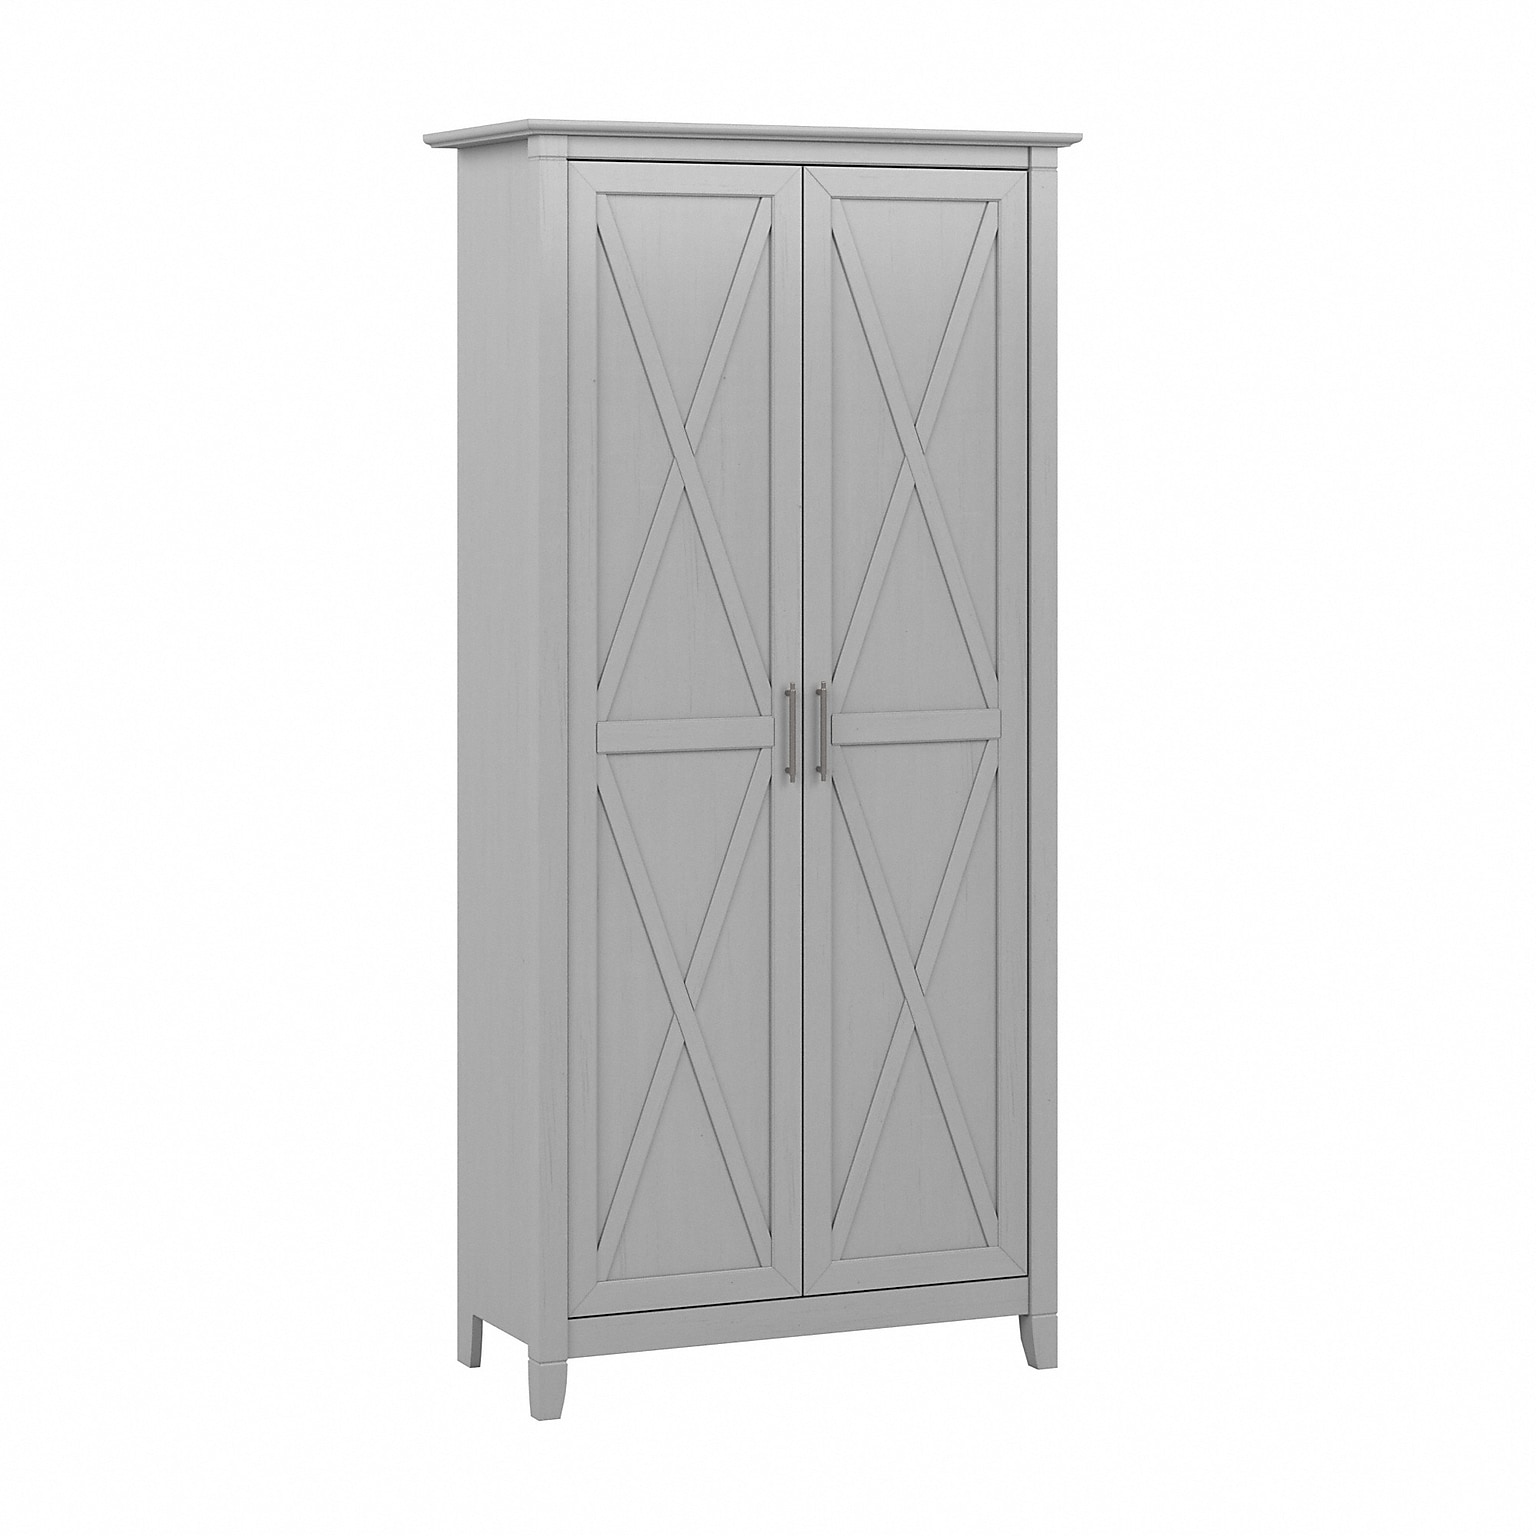 Bush Furniture Key West 66 Tall Storage Cabinet with Doors and 5 Shelves, Cape Cod Gray (KWS266CG-03)